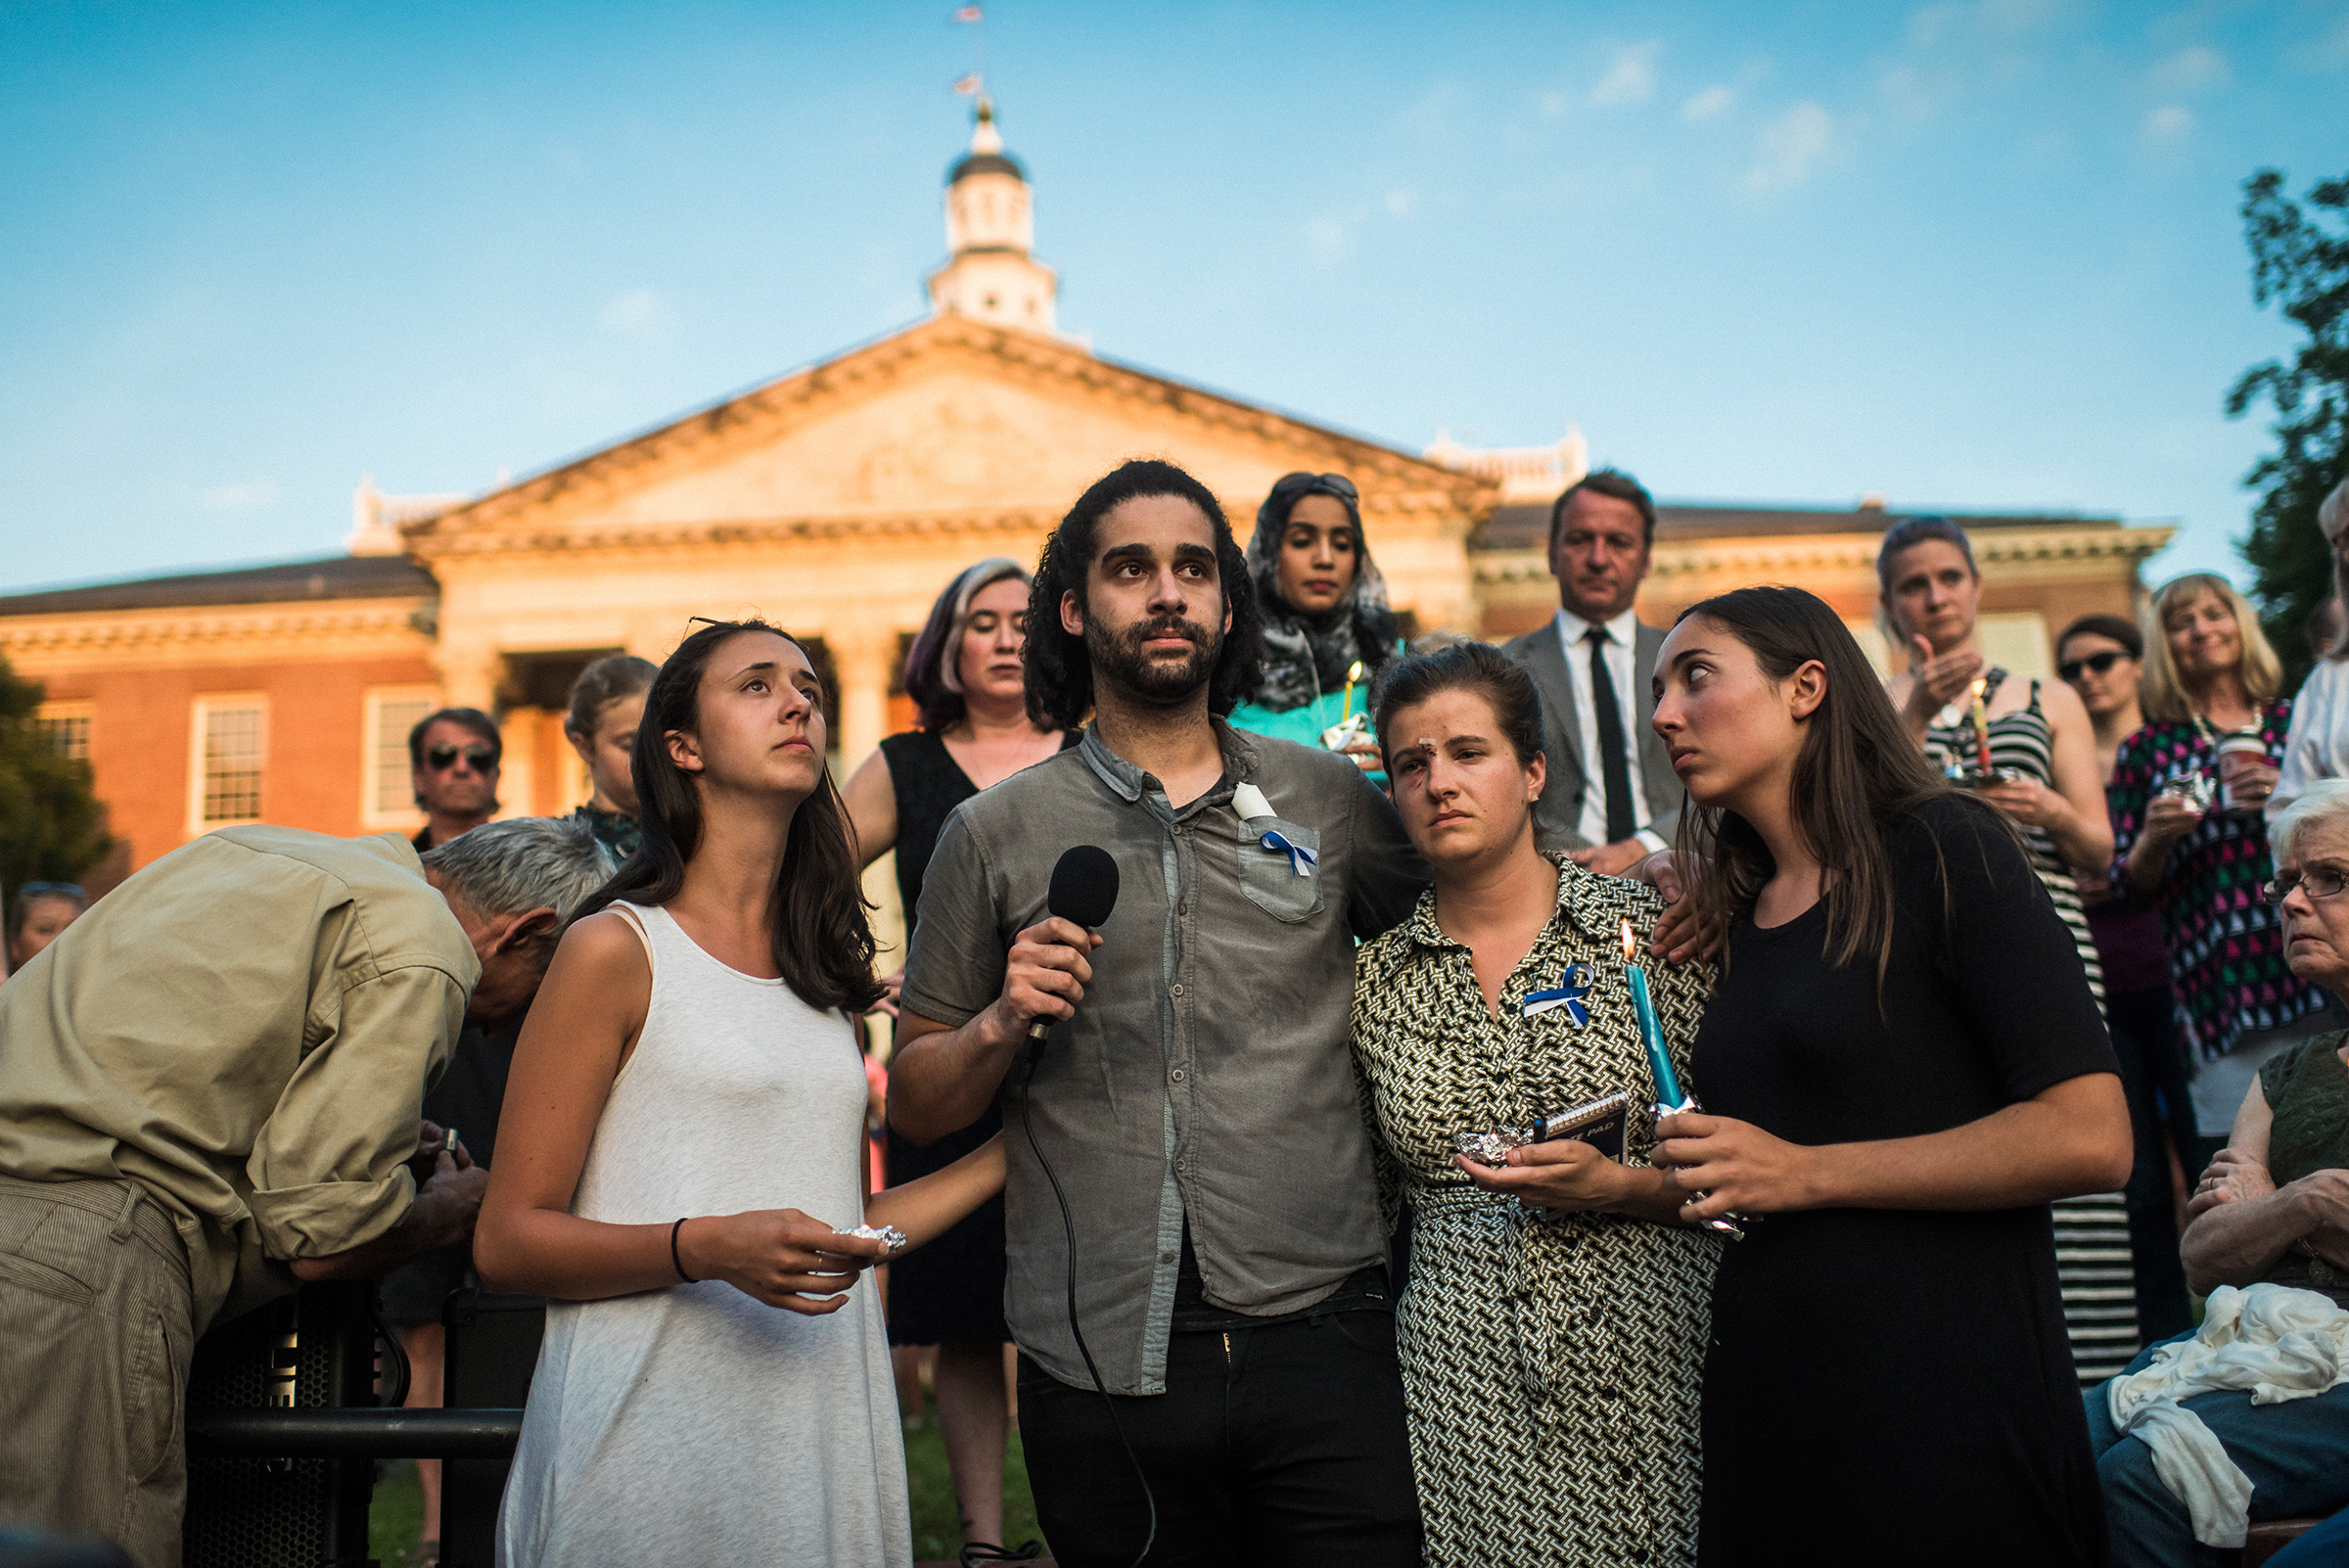 From left: Danielle Ohl, Phil Davis, Rachael Pacella and Selene San Felice—reporters at the Capital Gazette—address the crowd during a June 29, 2018, vigil for the victims of the newsroom shooting in Annapolis, Md. (Ryan Christopher Jones—The New York Times/Redux)